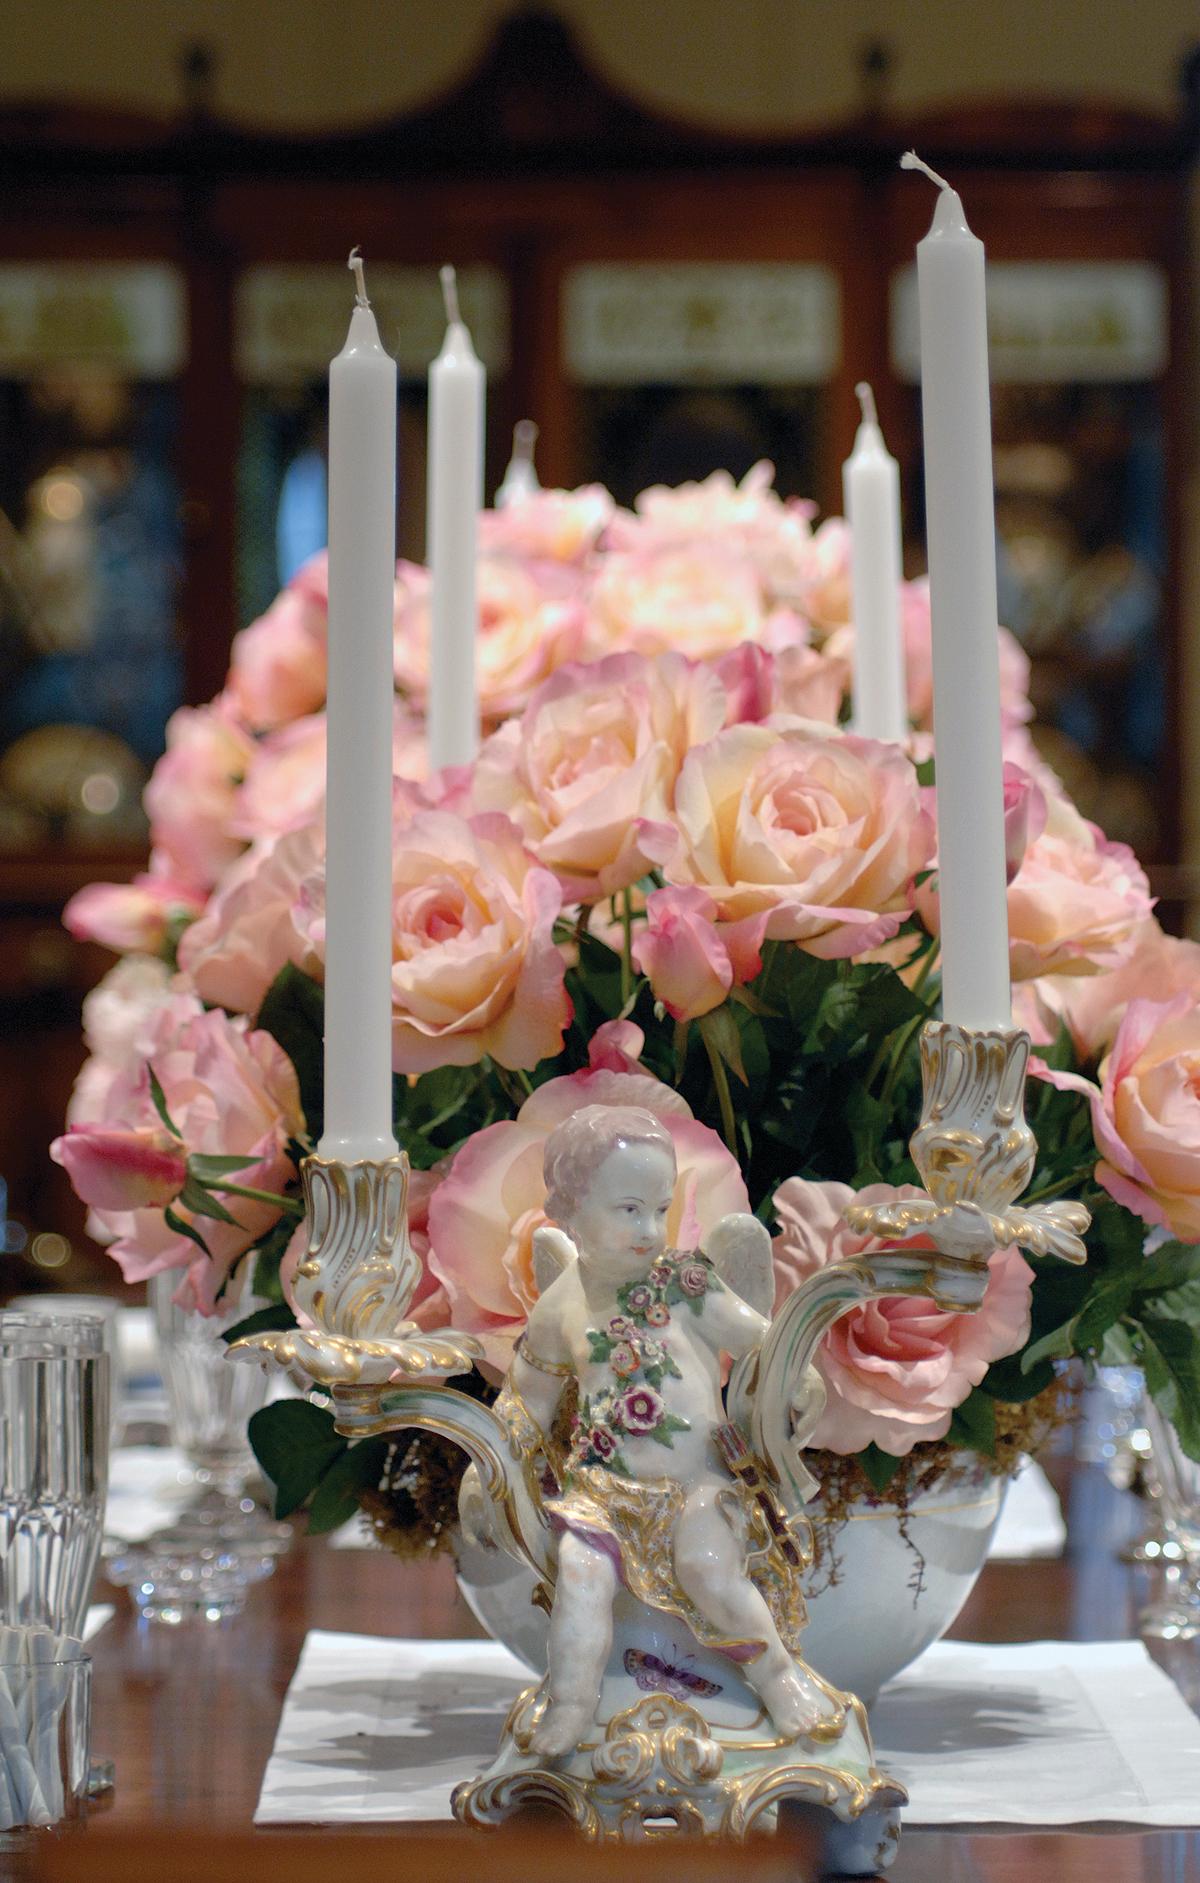 Photograph of candelabras, pink roses in a bouquet